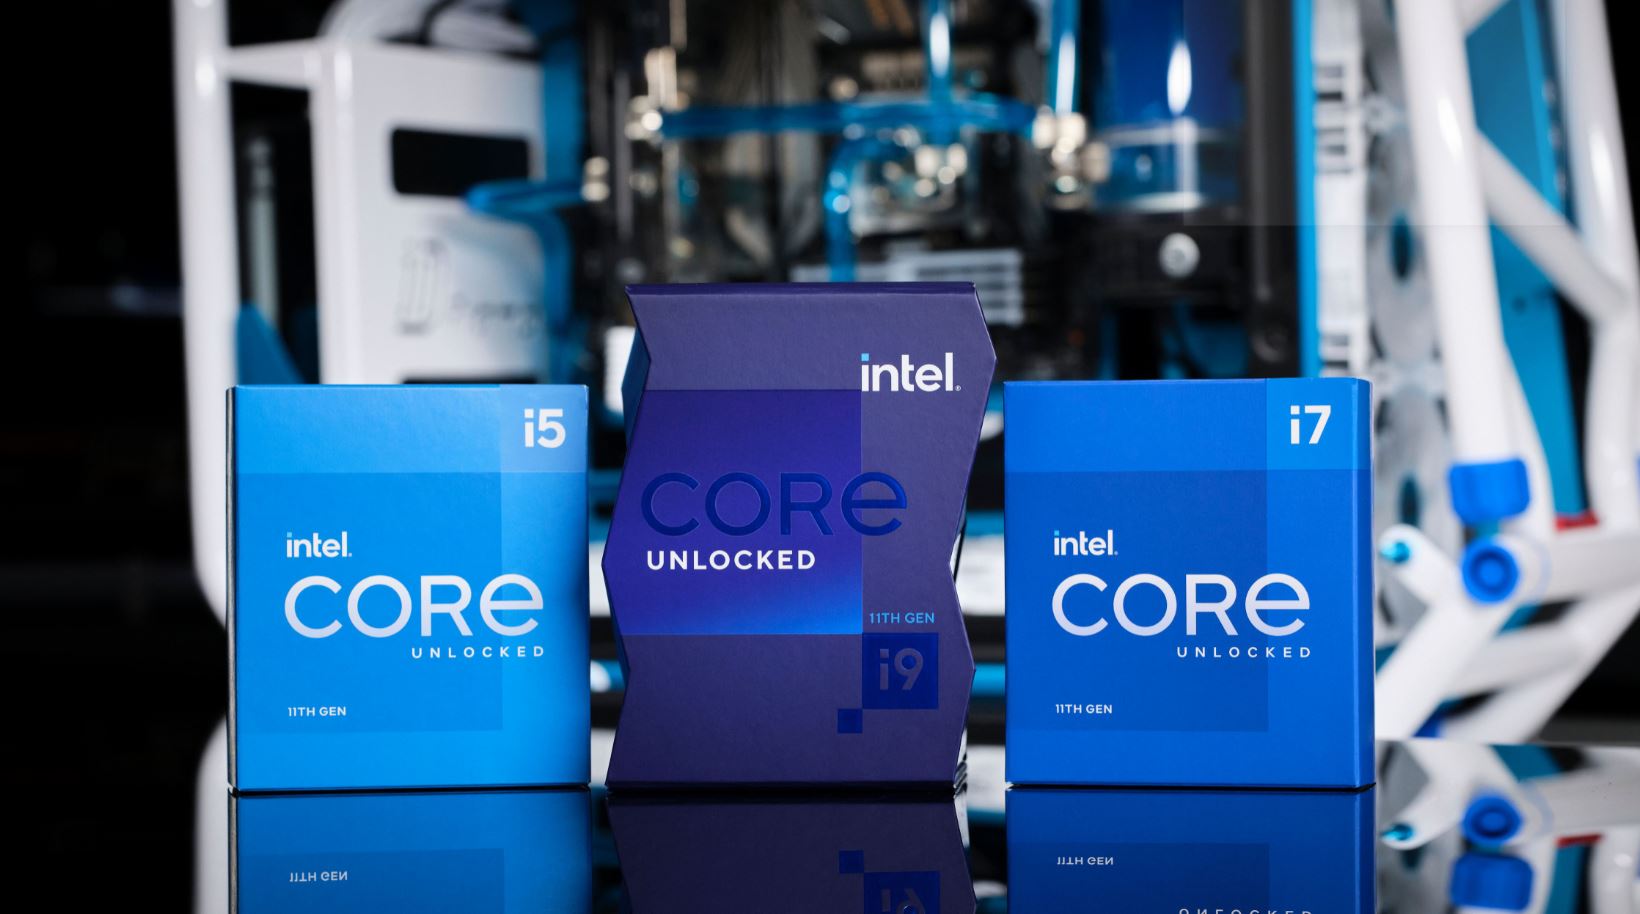 11th Gen Intel Core: Unmatched Overclocking, Game Performance